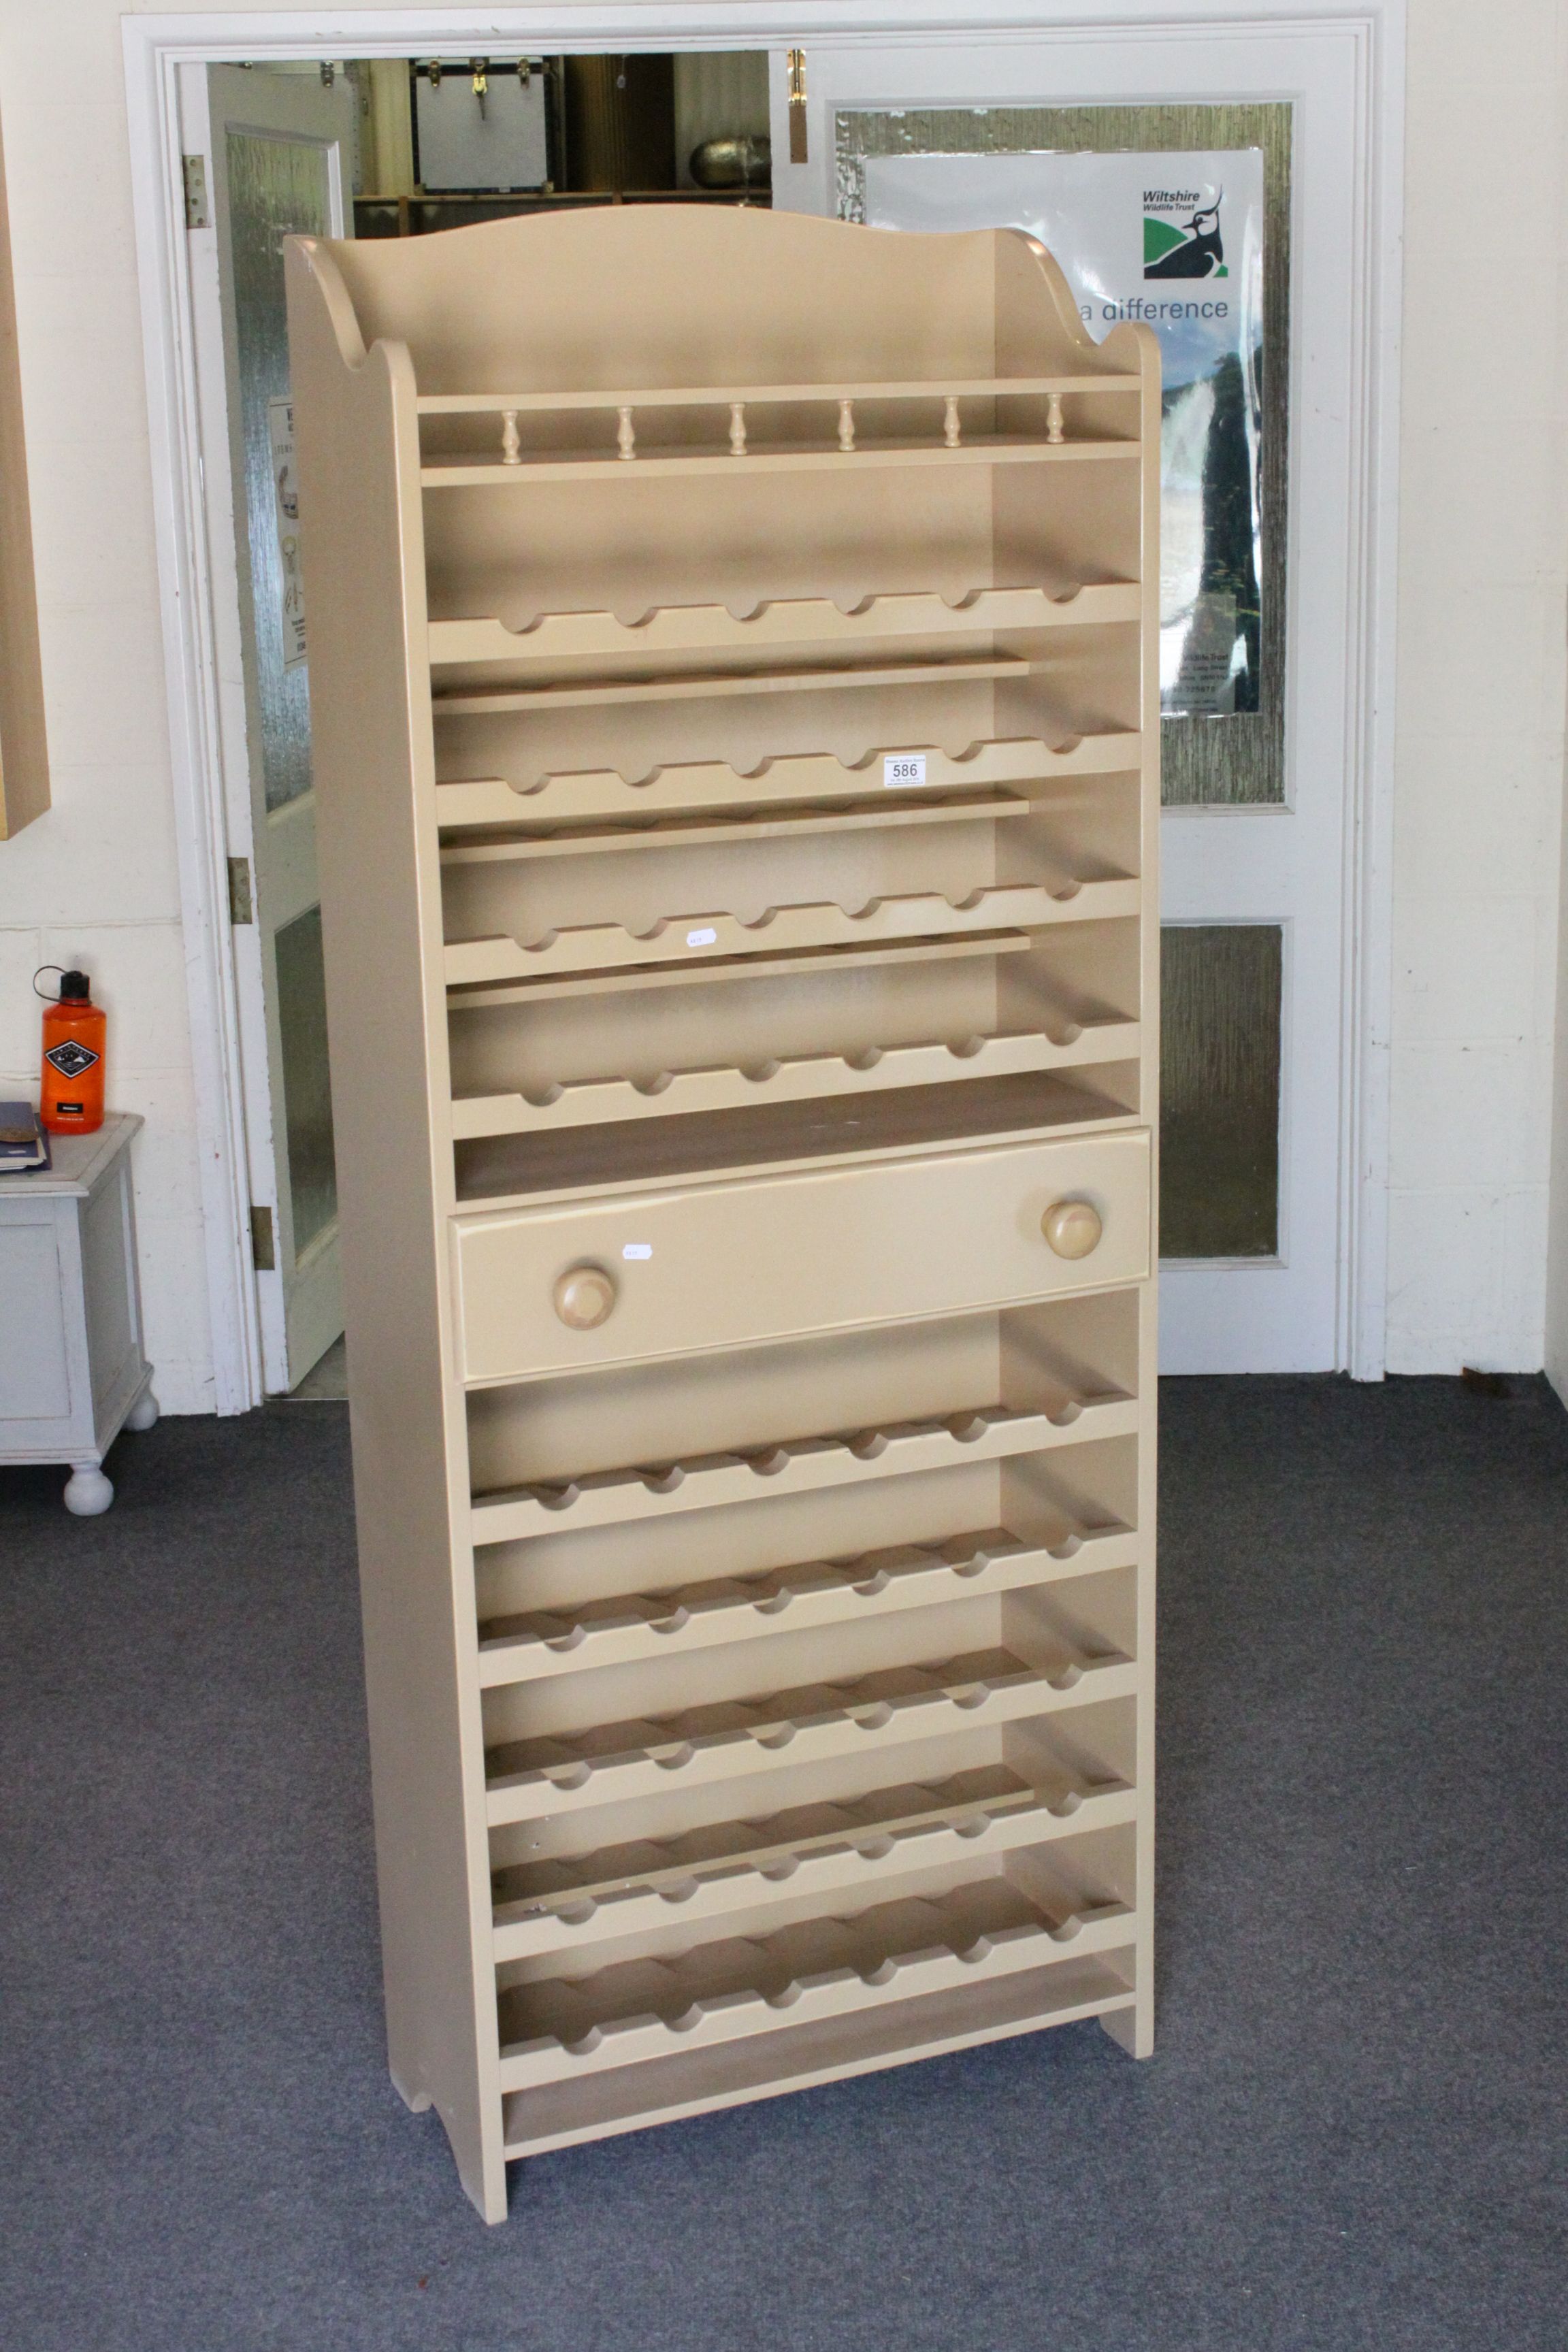 Contemporary 54 Wine Bottle Rack / Storage Unit with central drawer, approx. 169cm high x 68cm wide